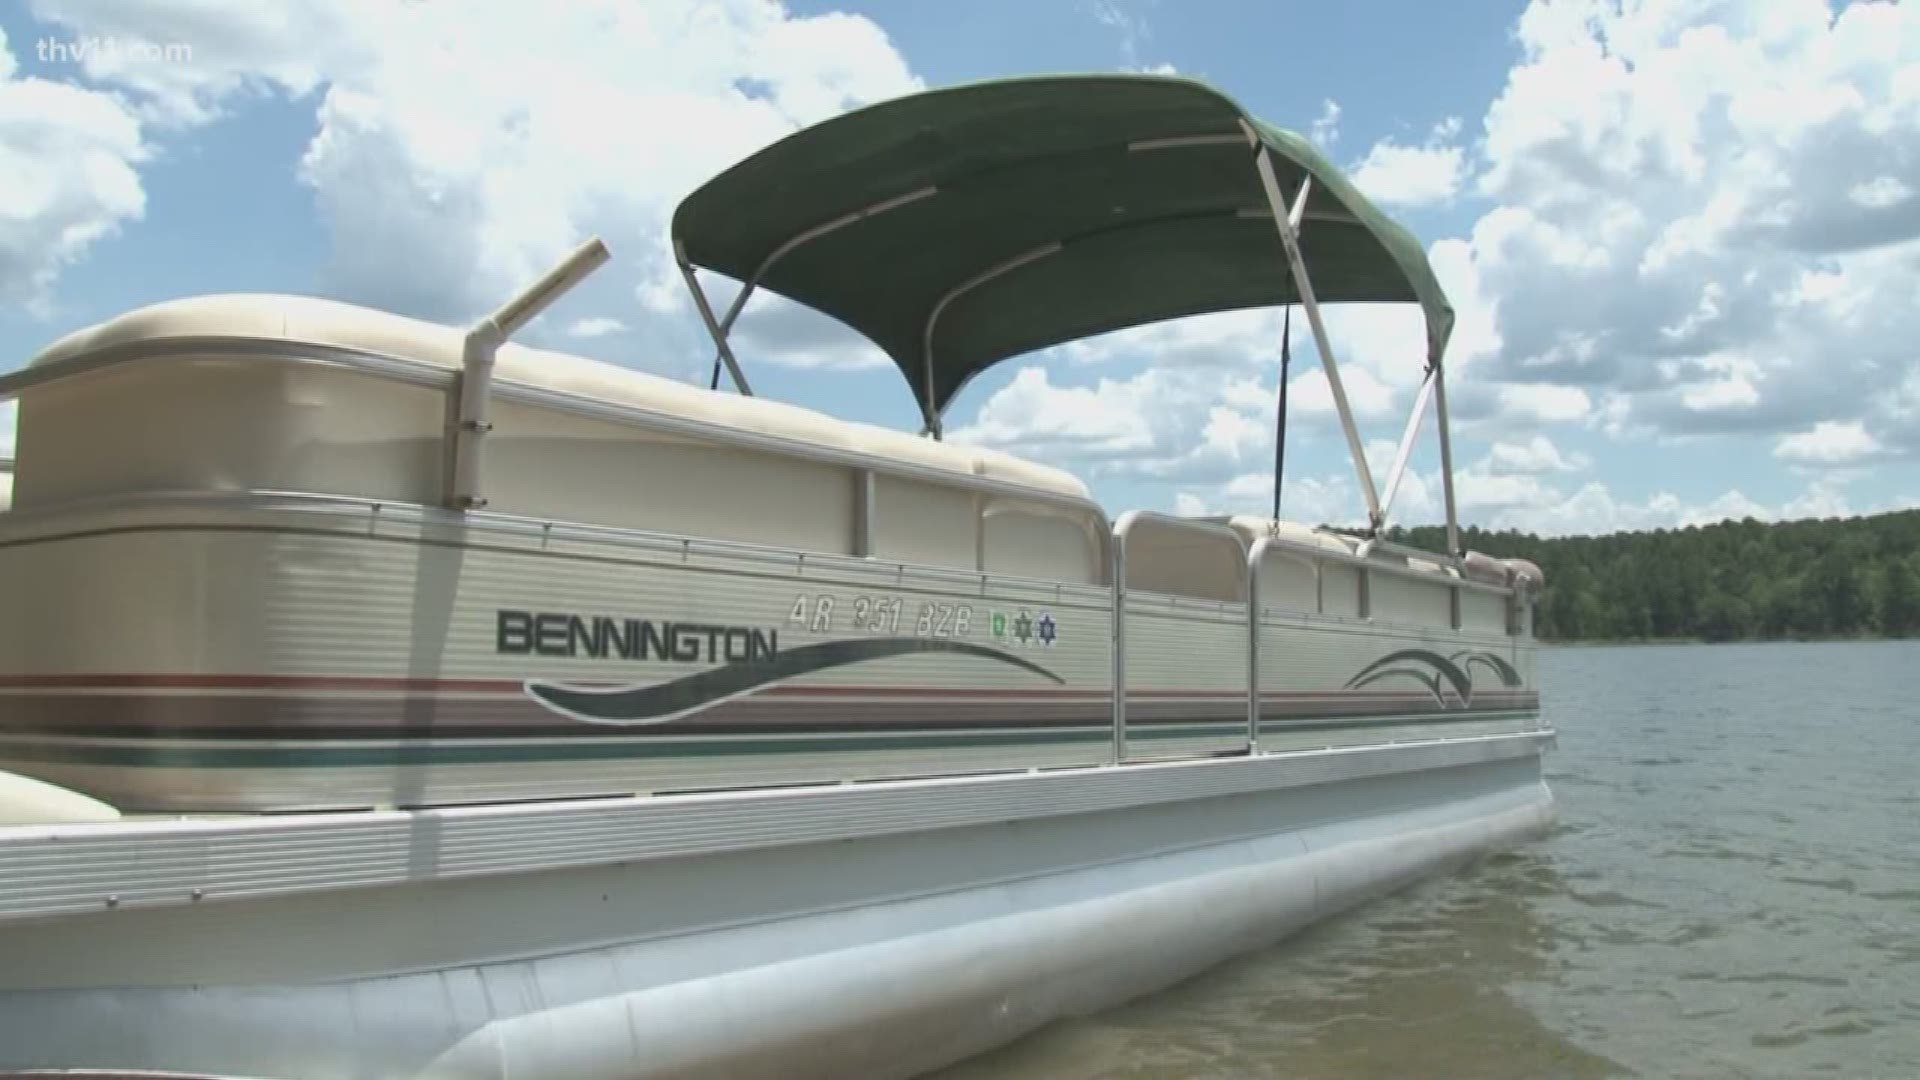 Some pontoon models may harbor a hidden danger that you need to know about.